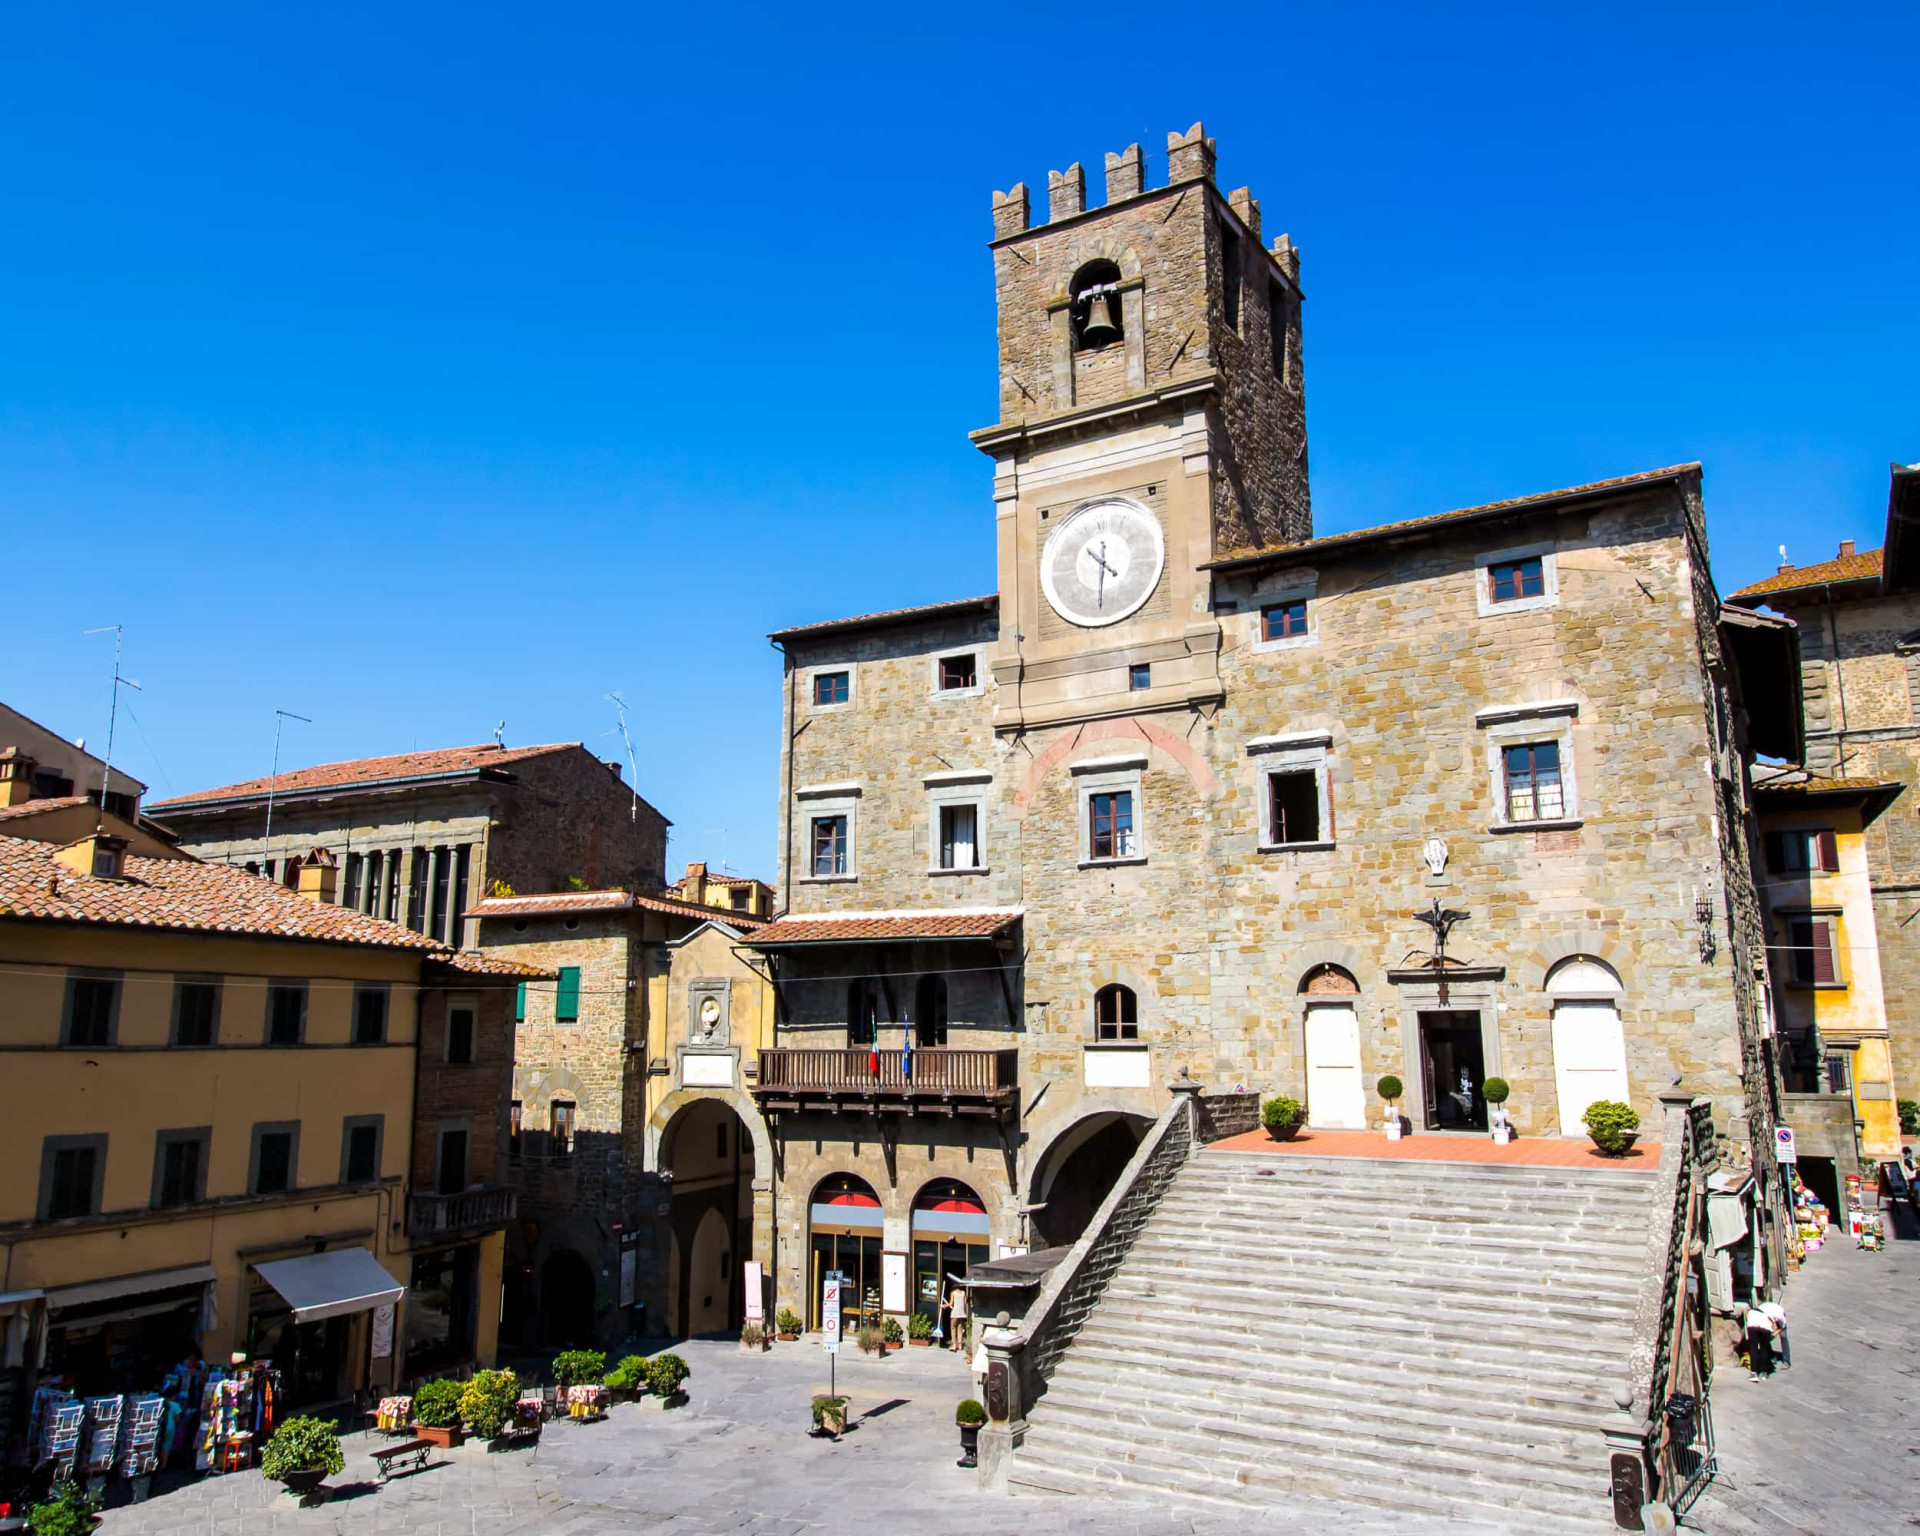 <p>A charming town in the Valdichiana, or Chiana Valley, in the province of Arezzo in southern Tuscany, Cortona is enclosed by stone walls dating back to the Etruscan and Roman periods.</p><p>You may also like:<a href="https://www.starsinsider.com/n/418256?utm_source=msn.com&utm_medium=display&utm_campaign=referral_description&utm_content=481361v4en-en_selected"> The fascinating world of Parisian cabarets</a></p>